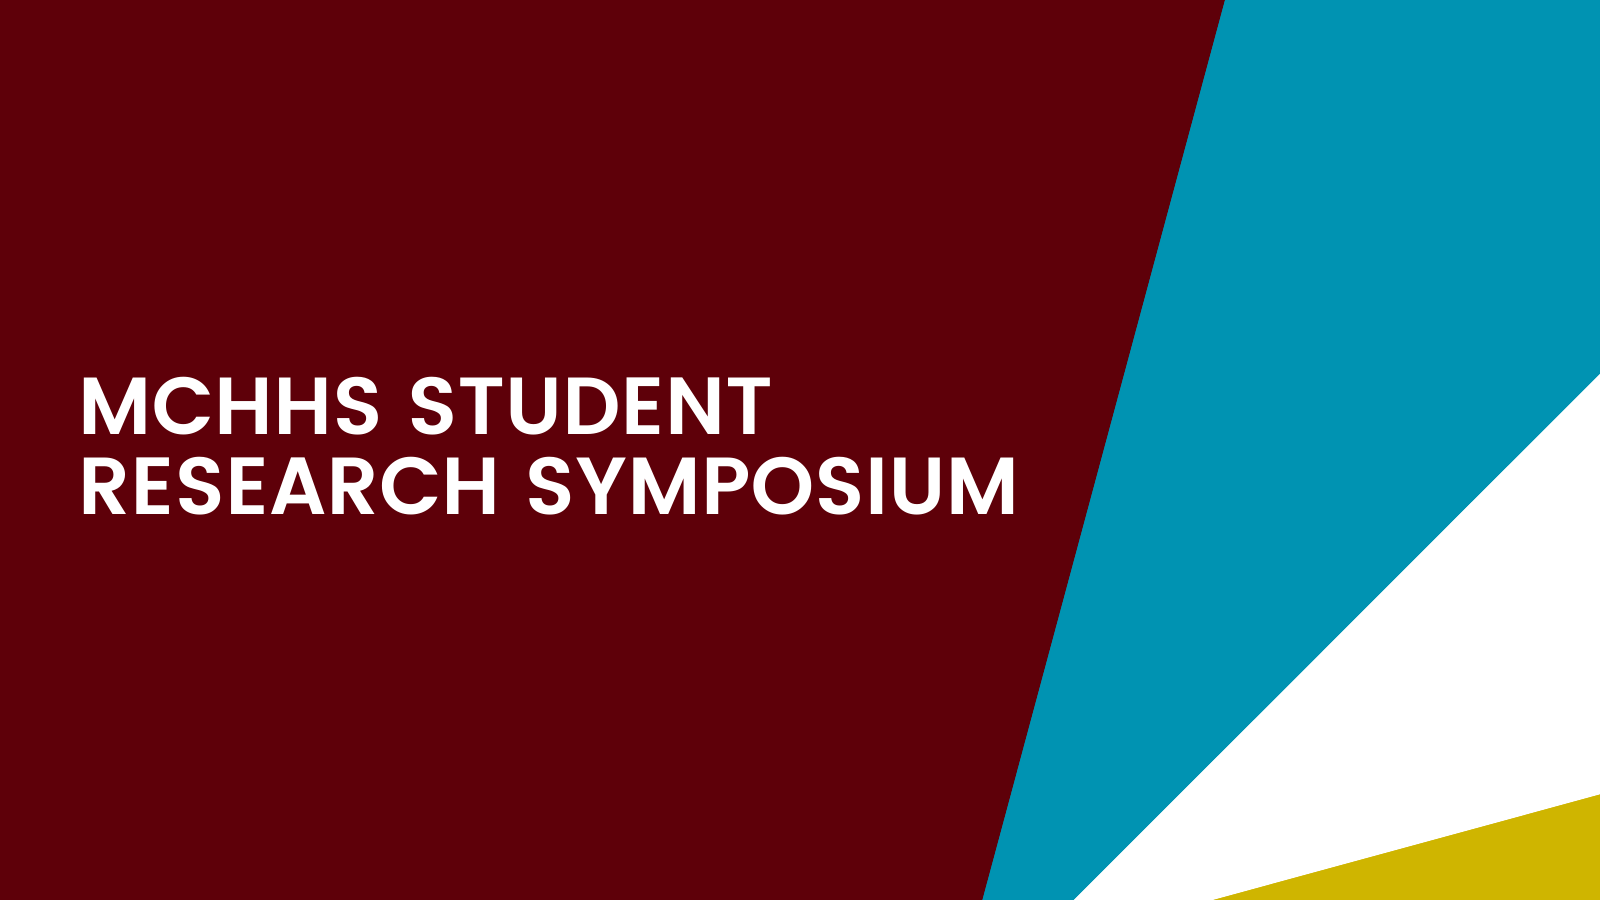 Image with text that reads "MCHHS Student Research Symposium"